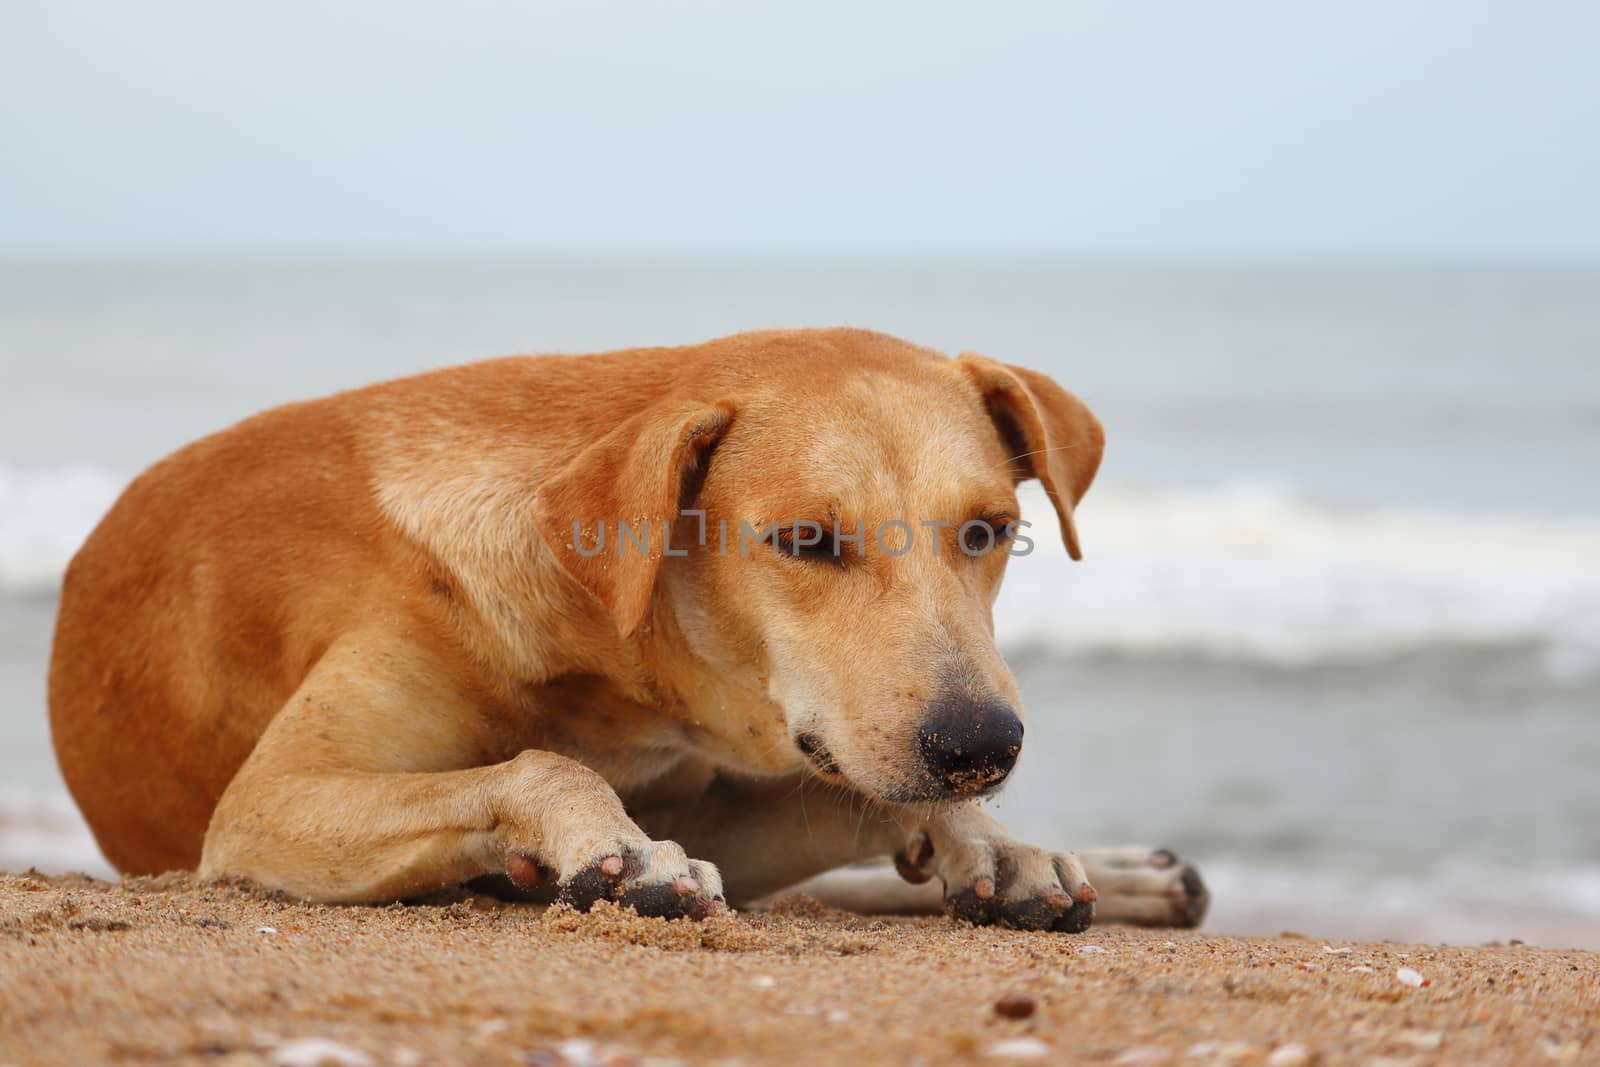 A yellow dog lying on the beach to escape the heat by 9500102400